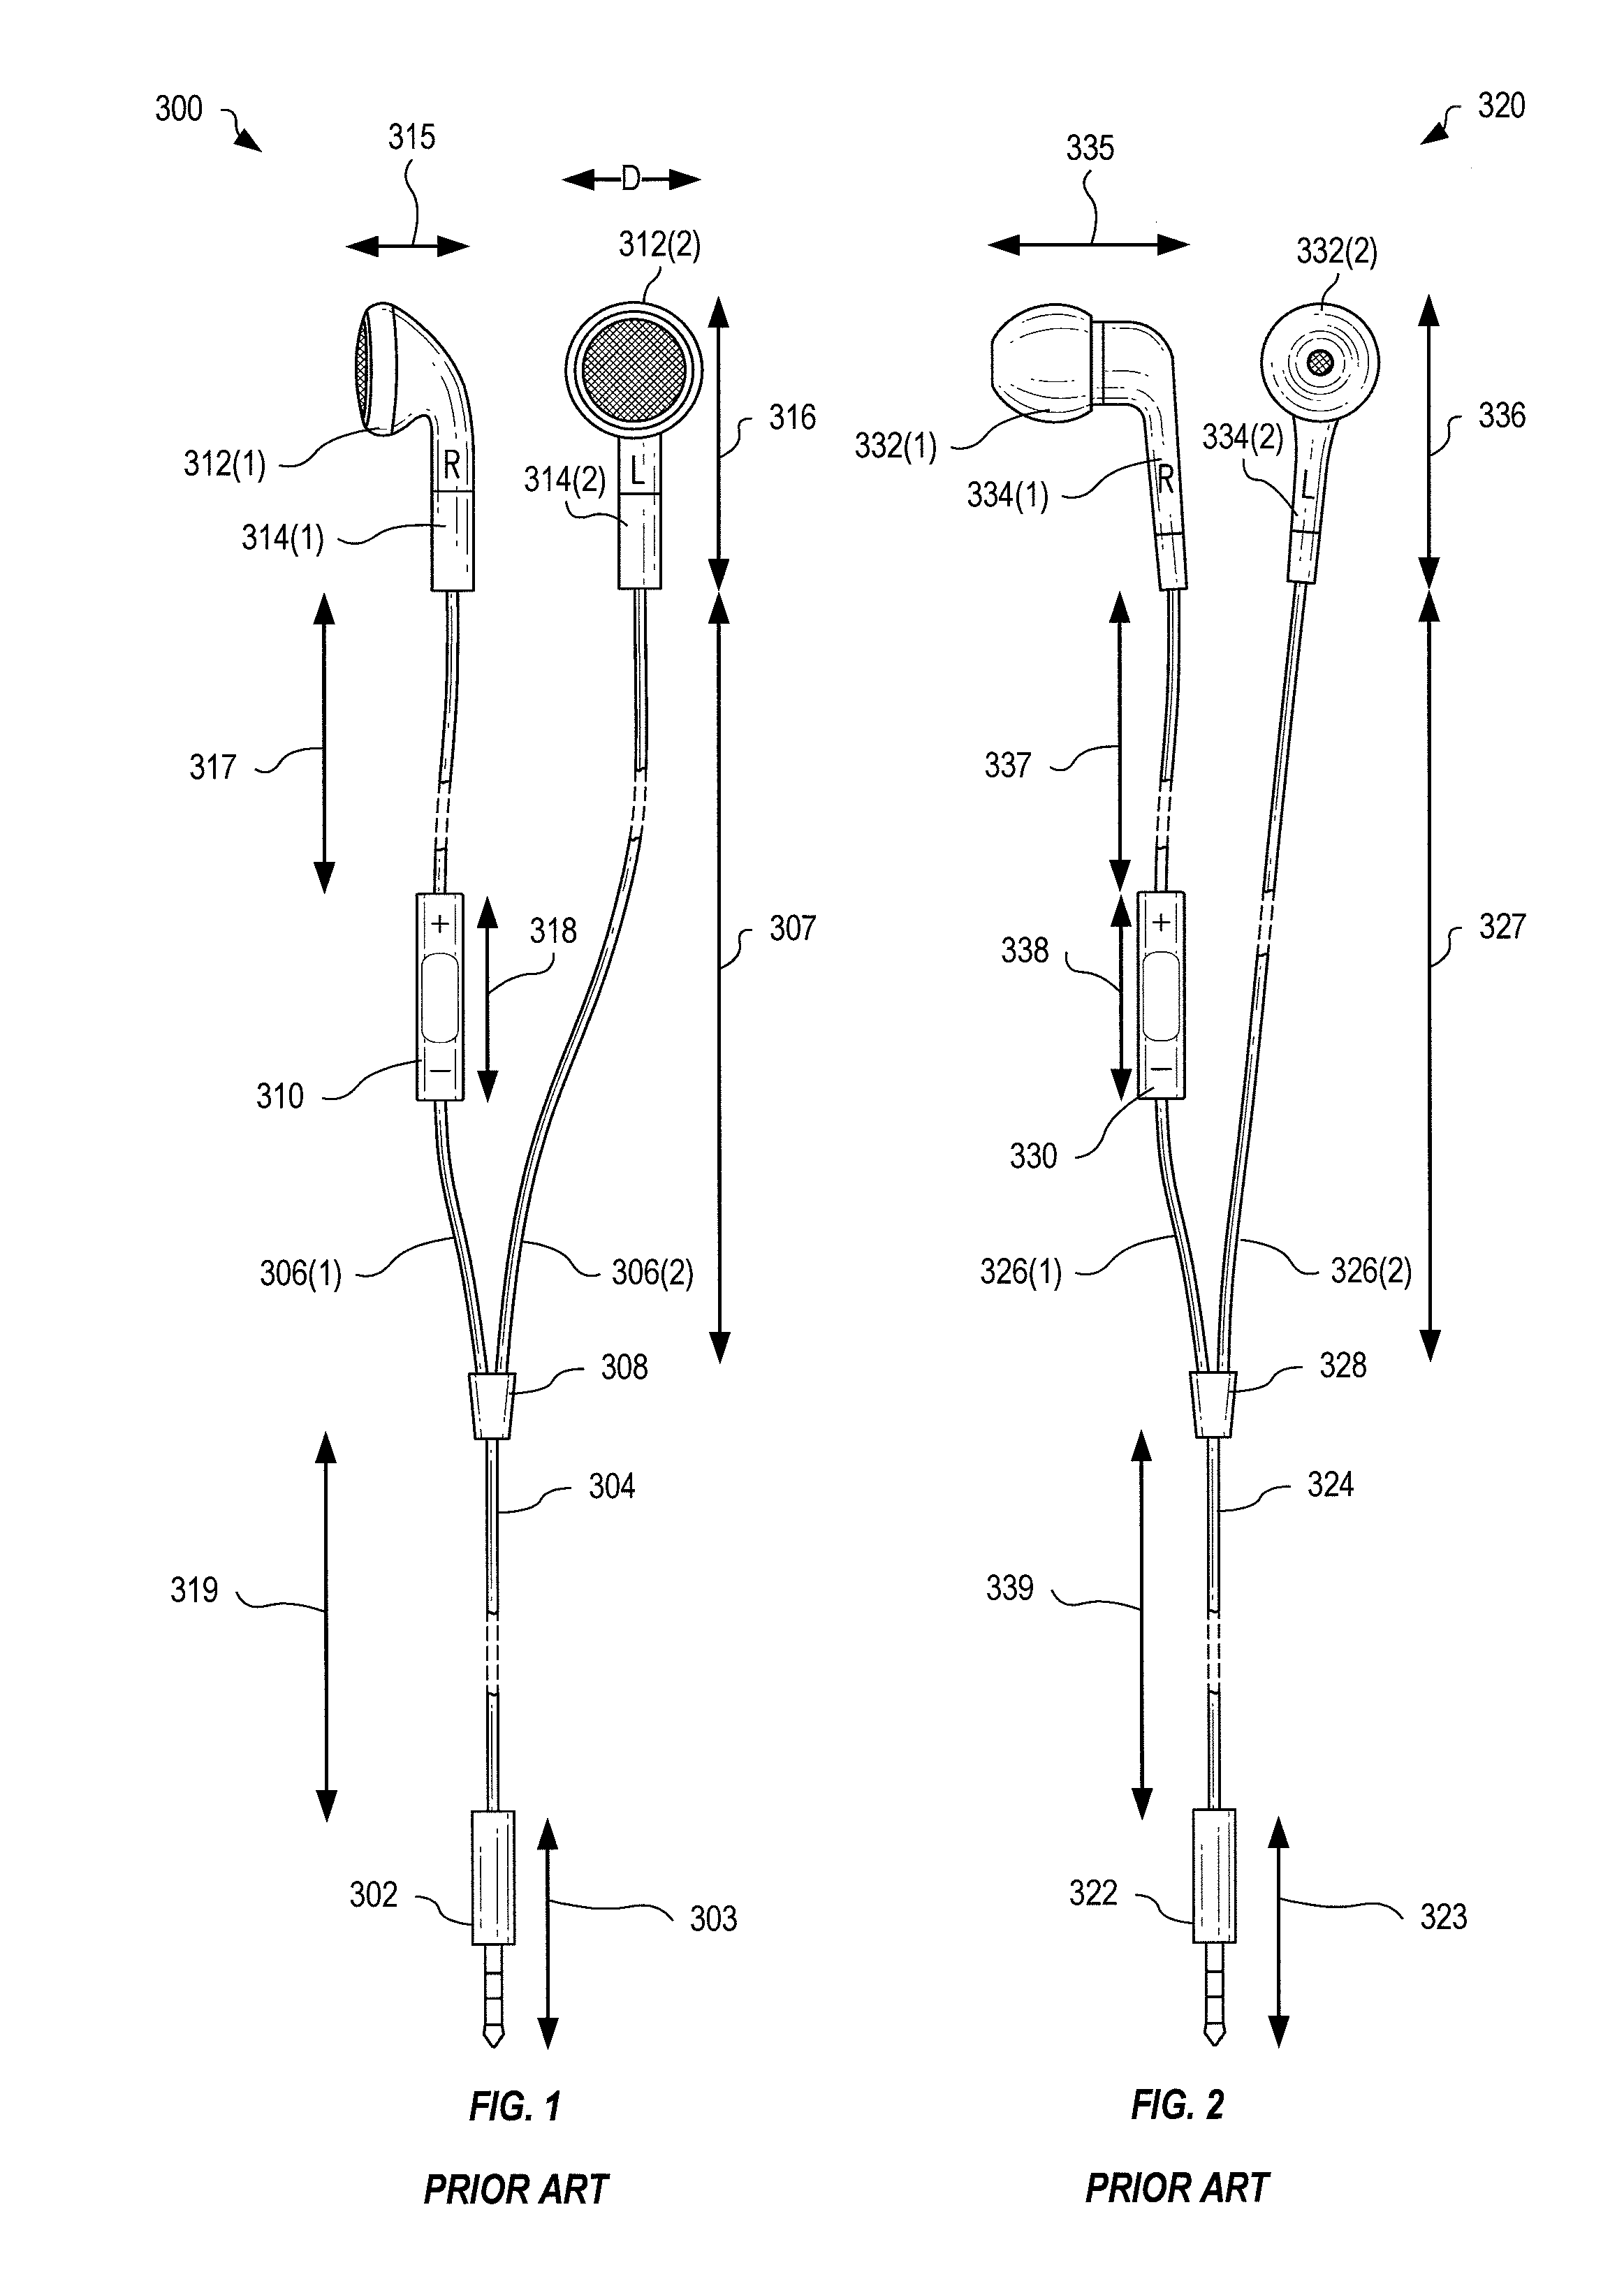 Ergonomic System For Compact Winding And Storage Of Earphone Set/Headphones Used With Digital Media Devices